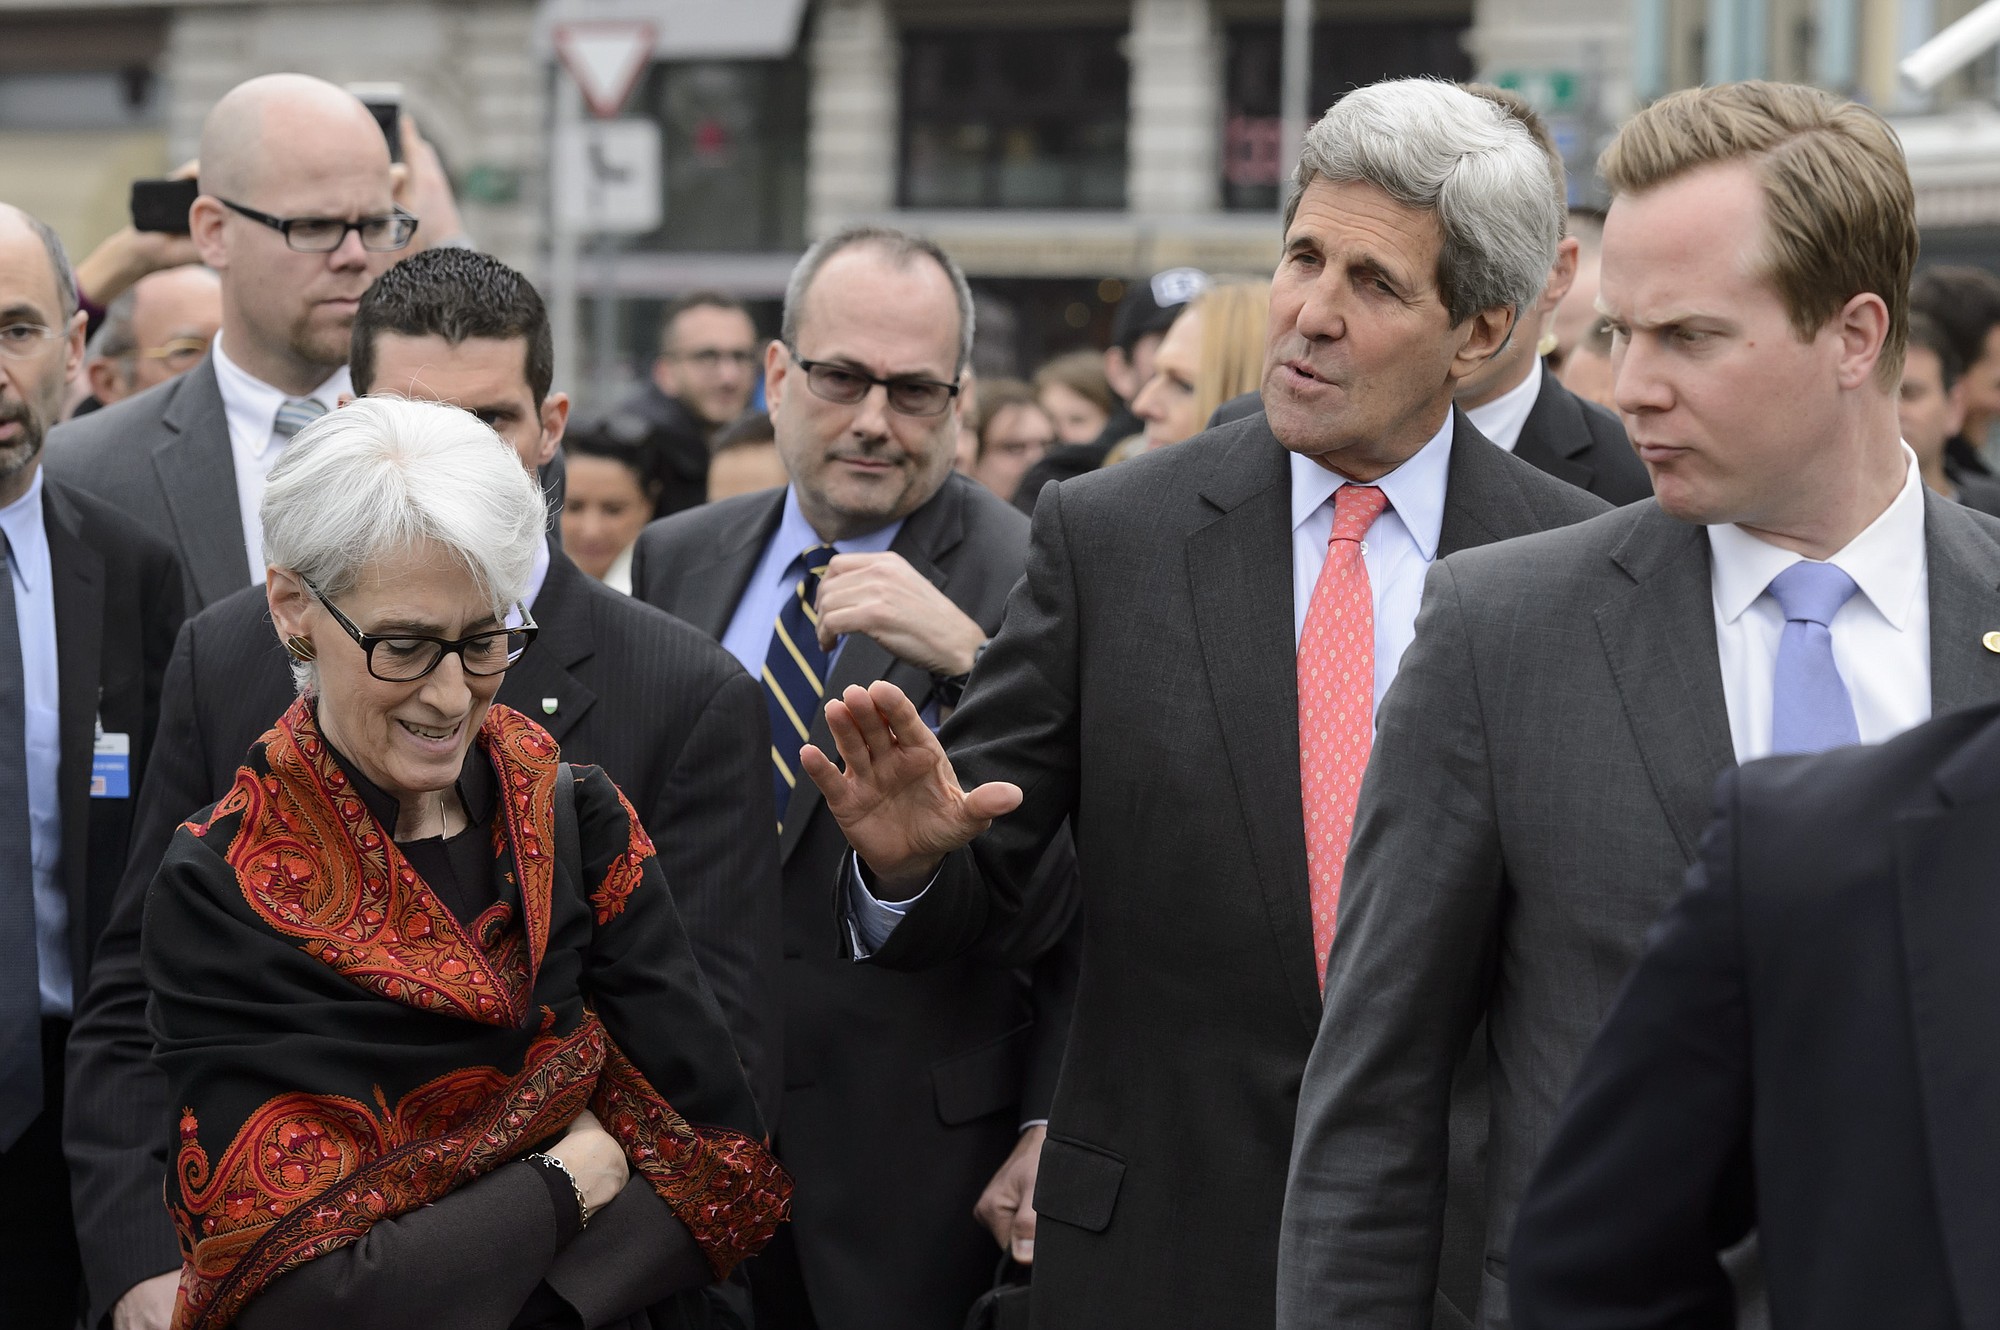 U.S. Secretary of State John Kerry, right, walks Friday with Wendy Sherman, left, U.S. Under Secretary of State for Political Affairs, outside the hotel after lunch at the Creperie d'Ouchy during a break from a bilateral meeting with Iranian Foreign Minister Mohammad Javad Zarif for a new round of Iran nuclear talks, in Lausanne, Switzerland.